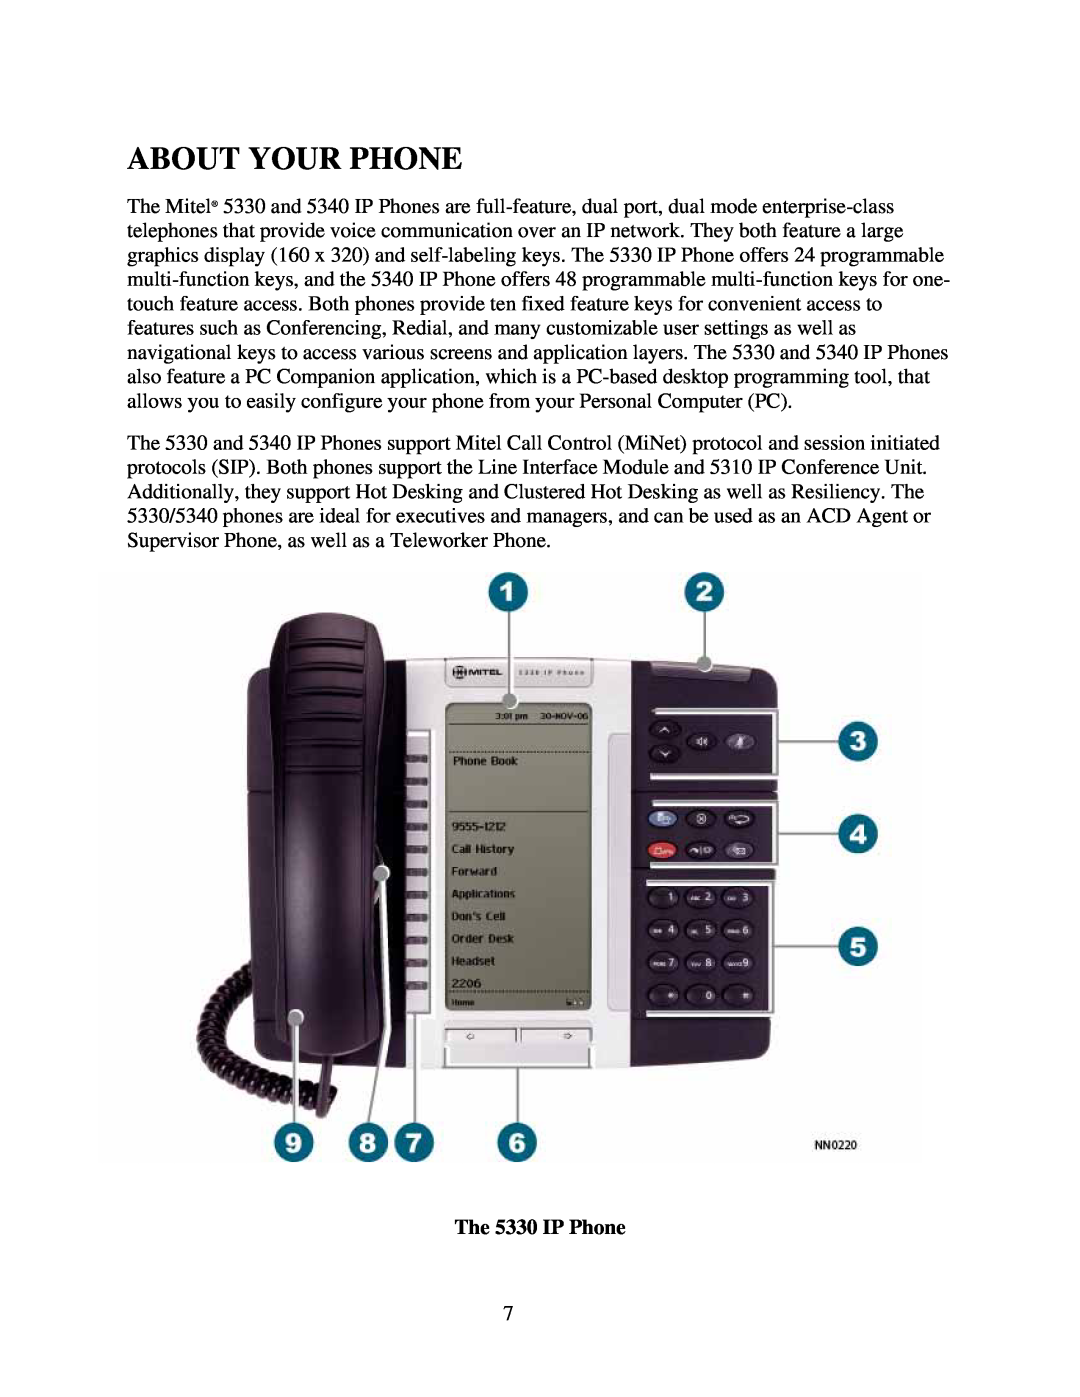 Mitel 5340 manual About Your Phone, The 5330 IP Phone 